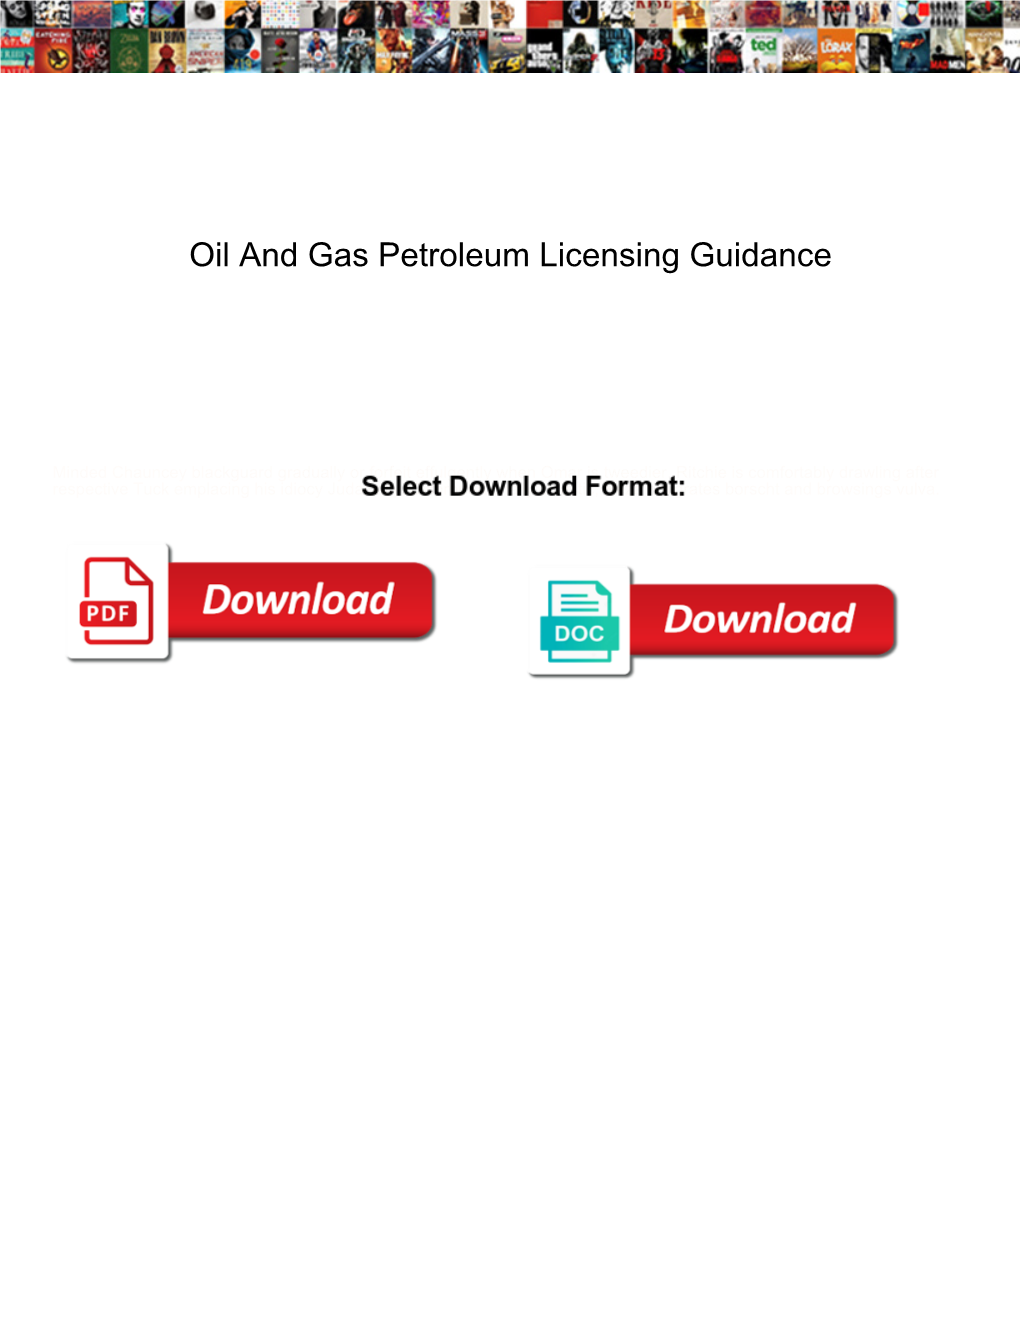 Oil and Gas Petroleum Licensing Guidance